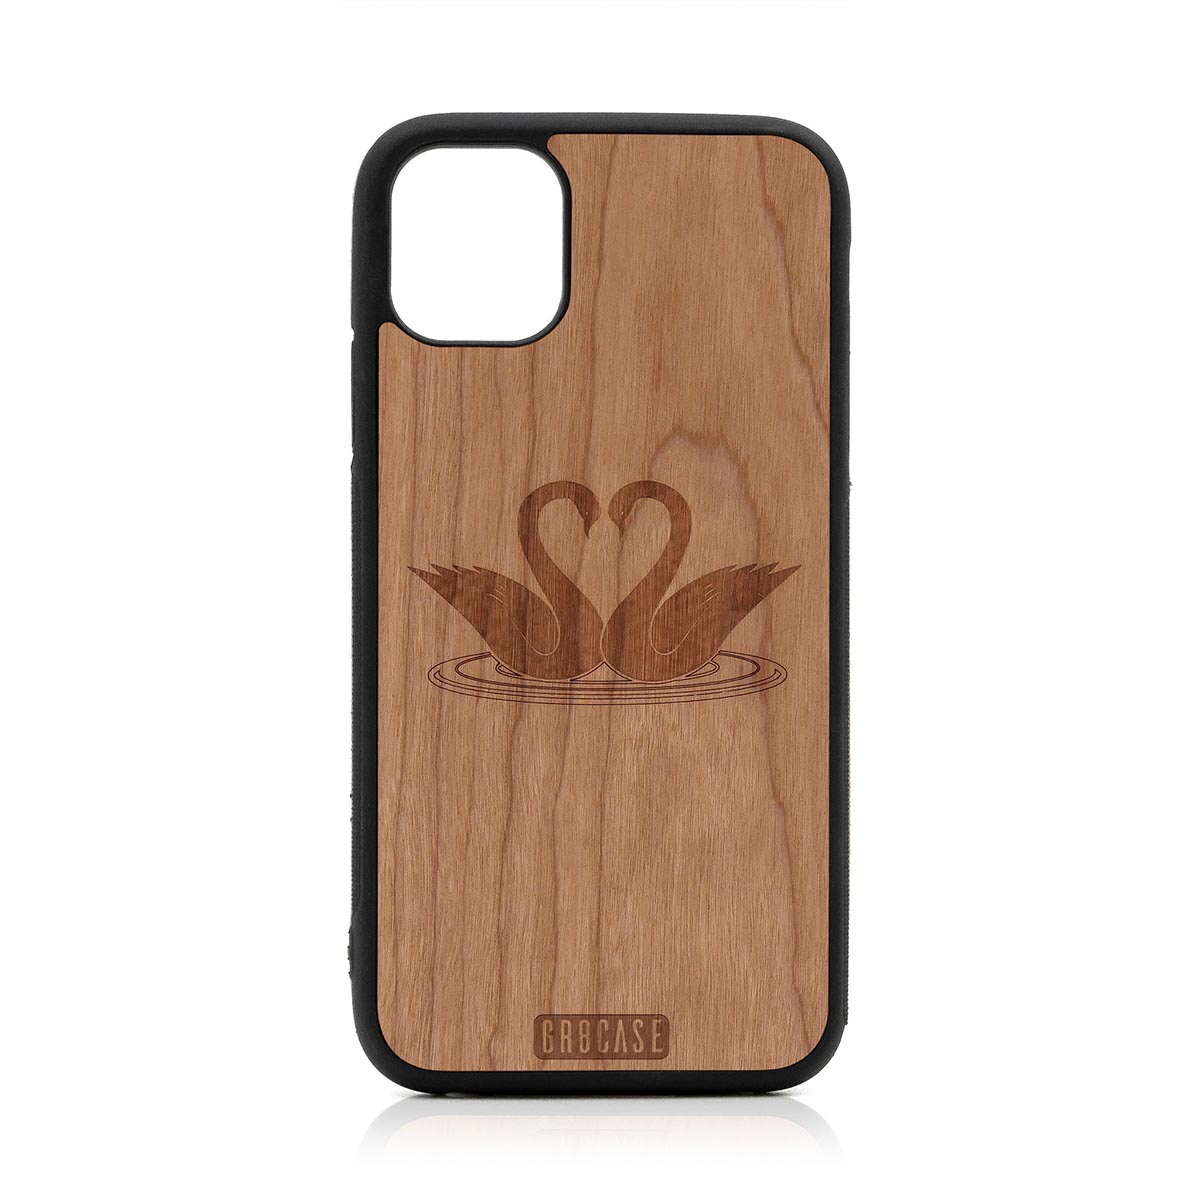 Swans Design Wood Case For iPhone 11